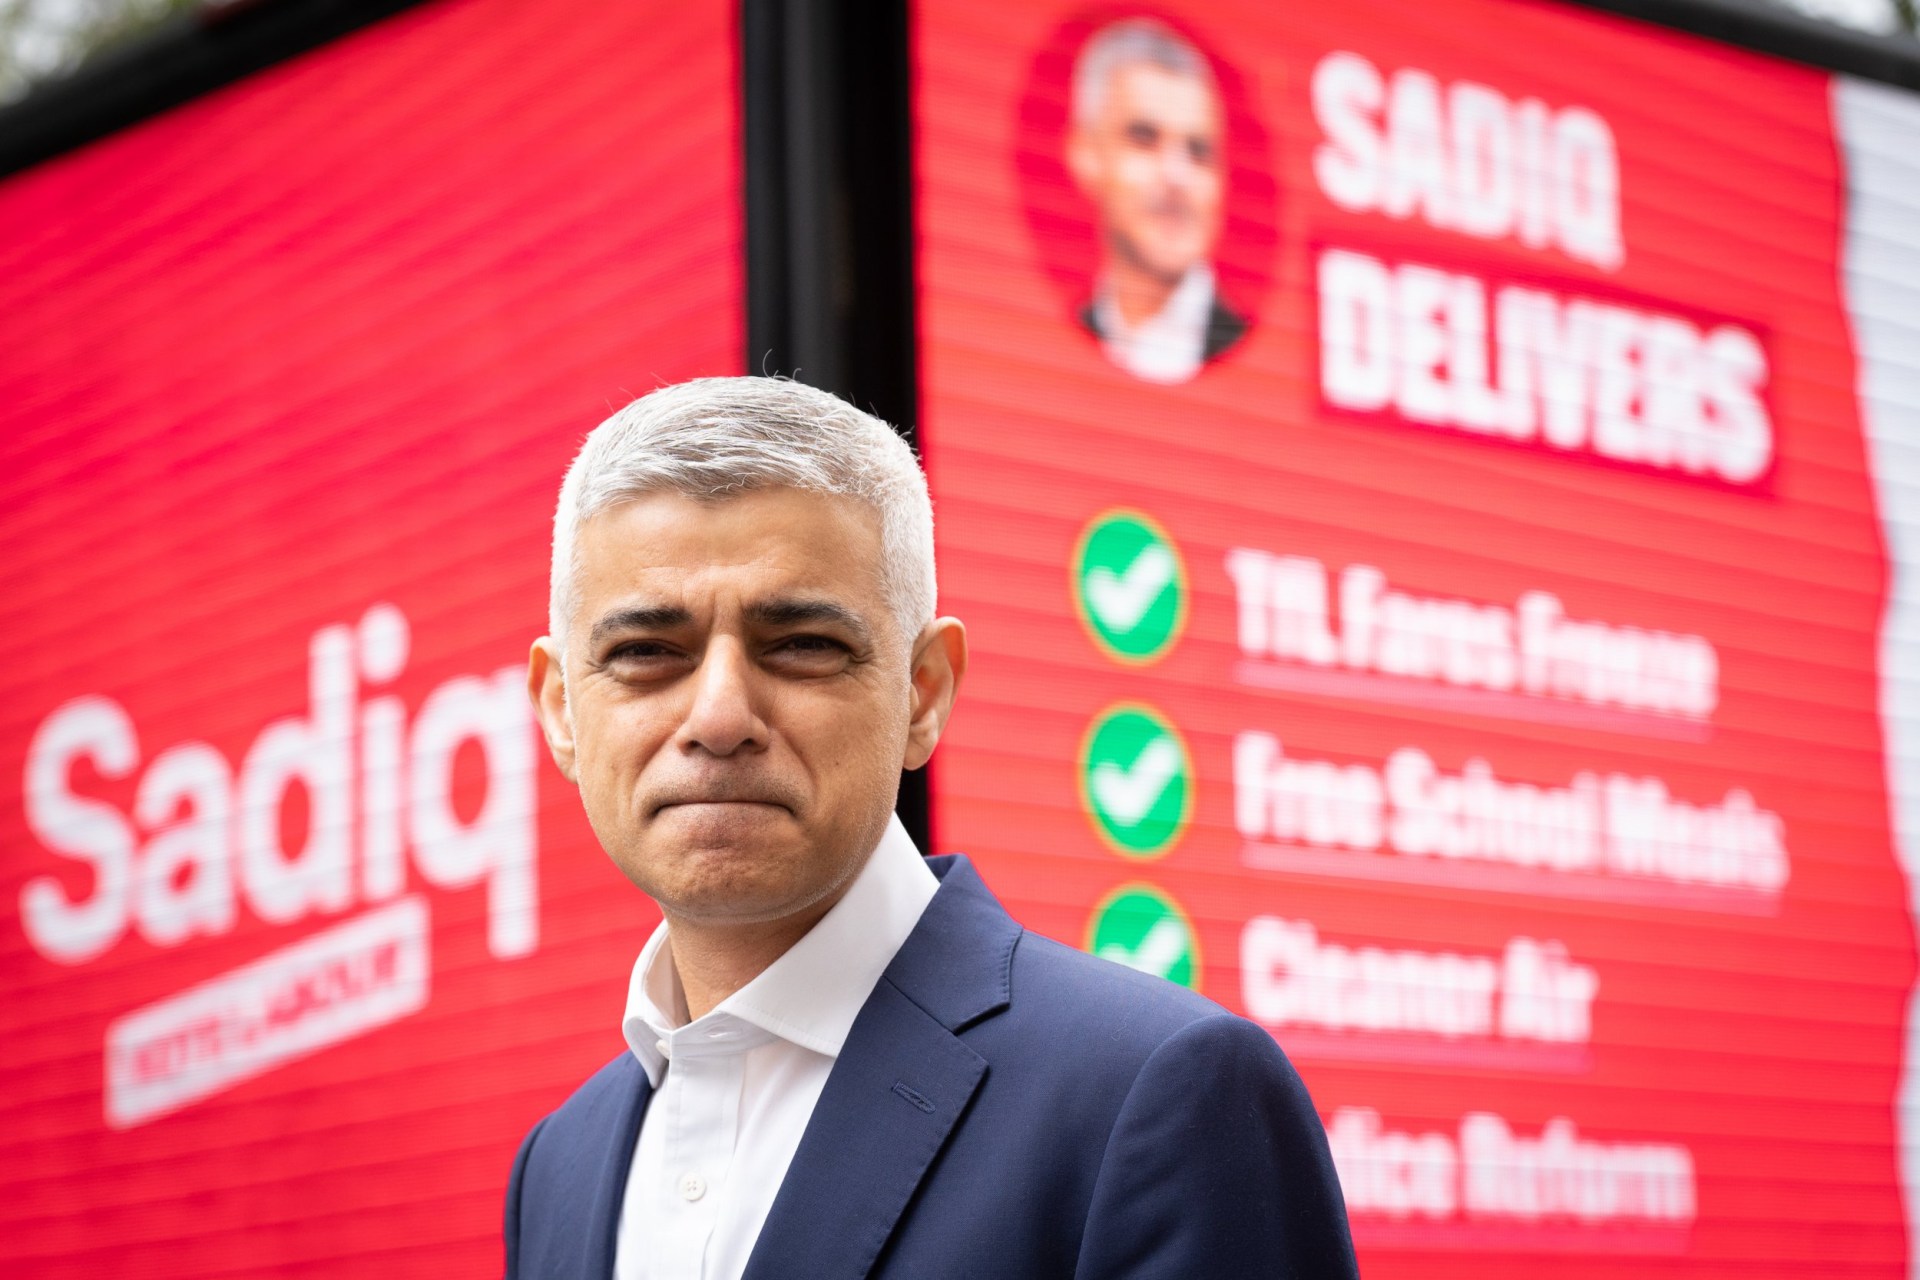 who are the london mayoral candidates?